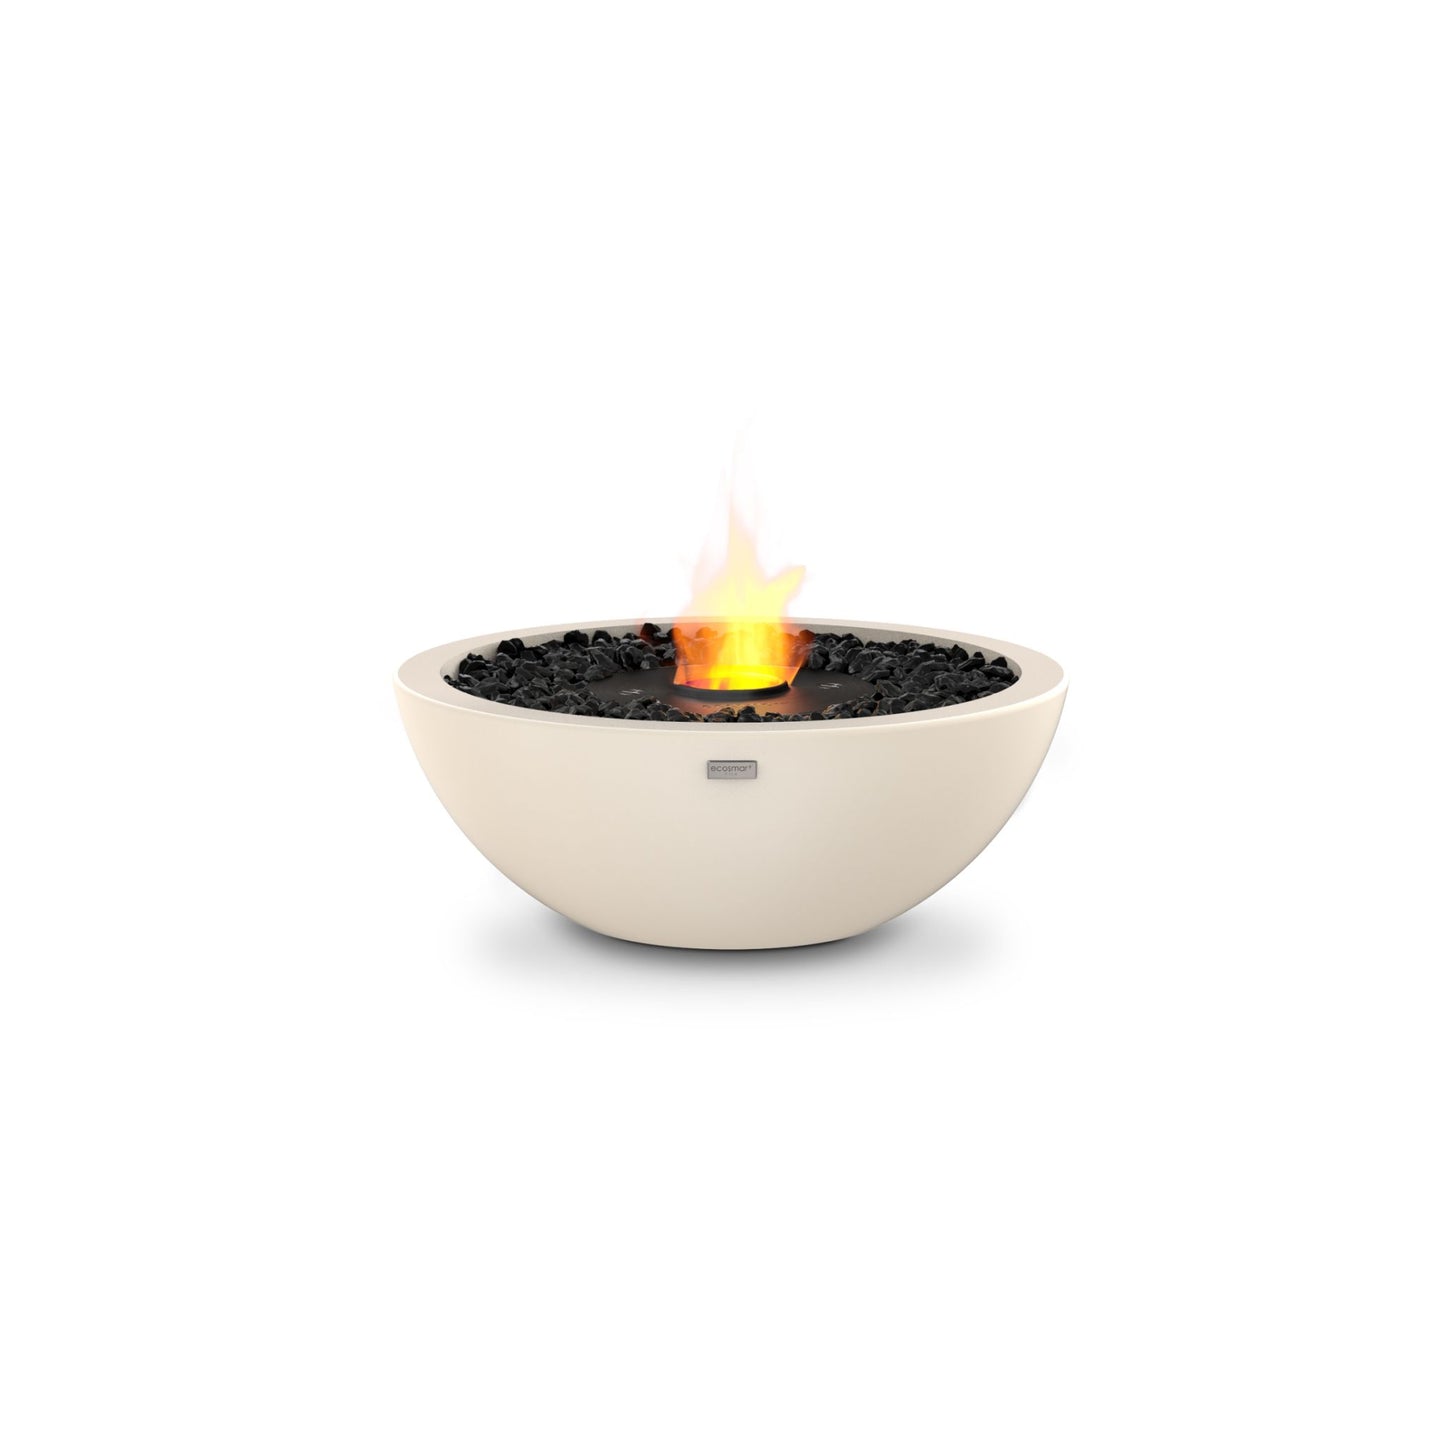 Ecosmart Fire Mix 600 bioethanol fire pit bowl in white concrete with black steel burner on a white background